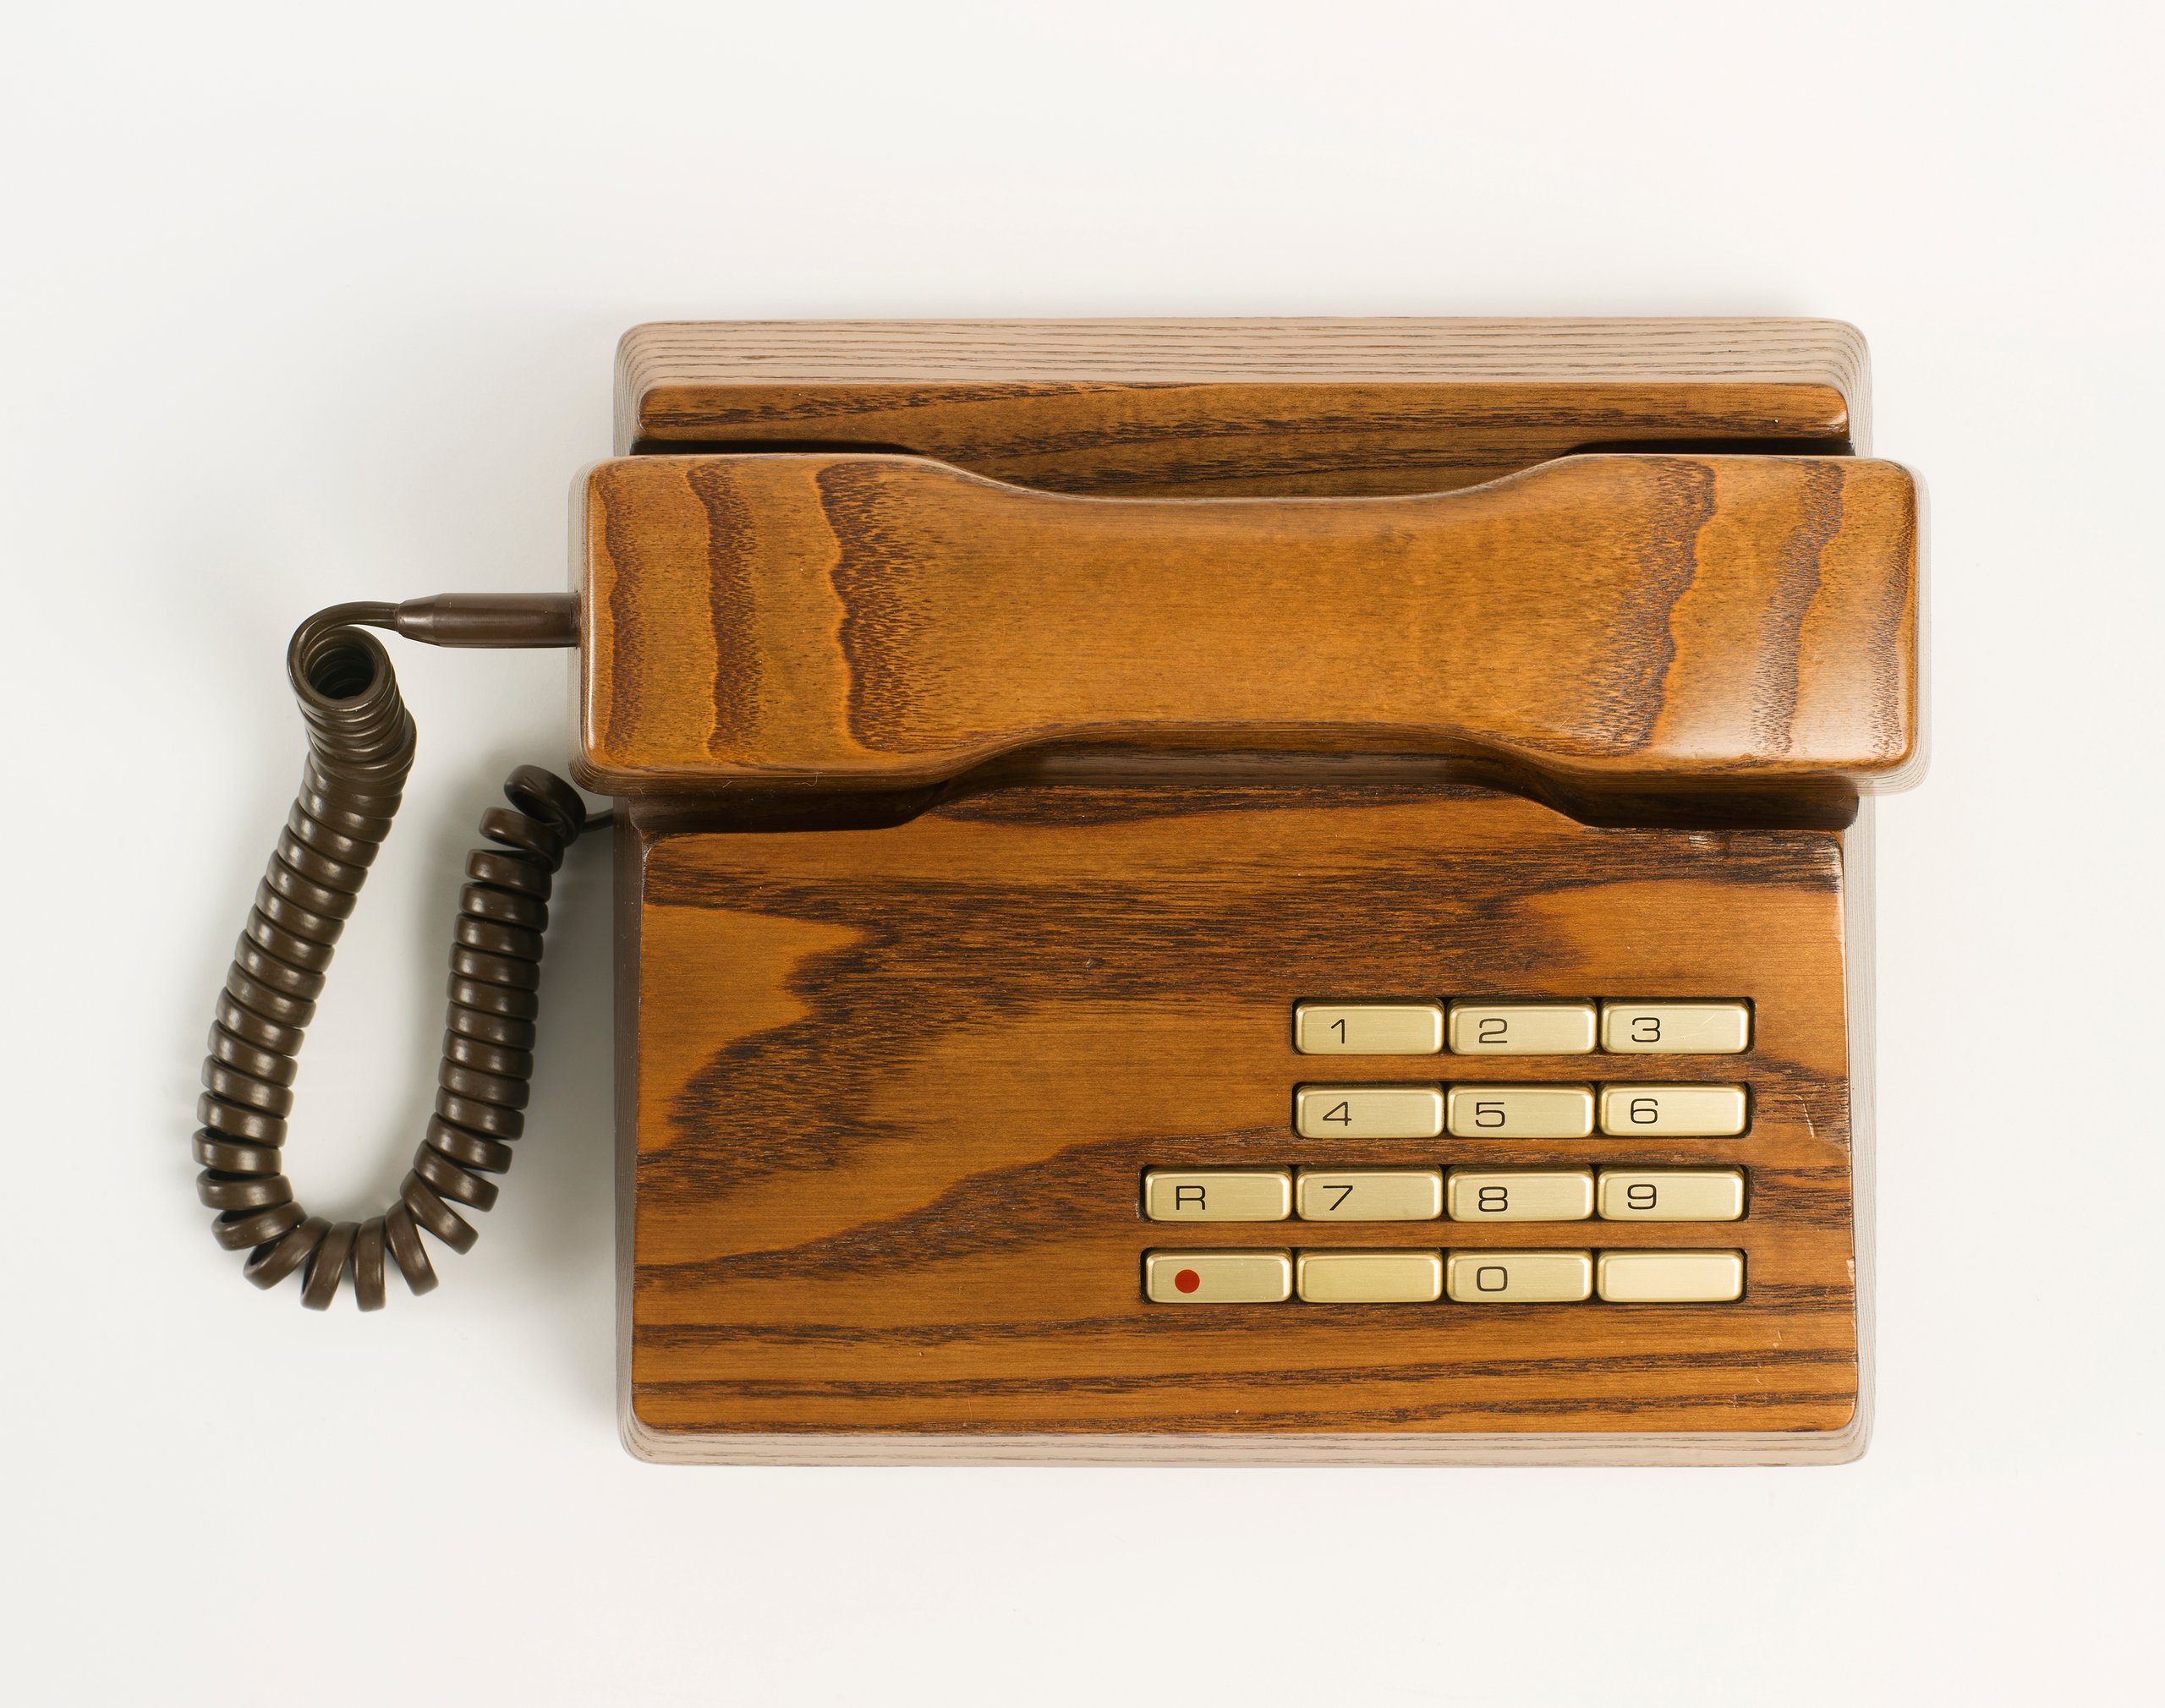 Gfeller Trub telephone made from solid Rosewood